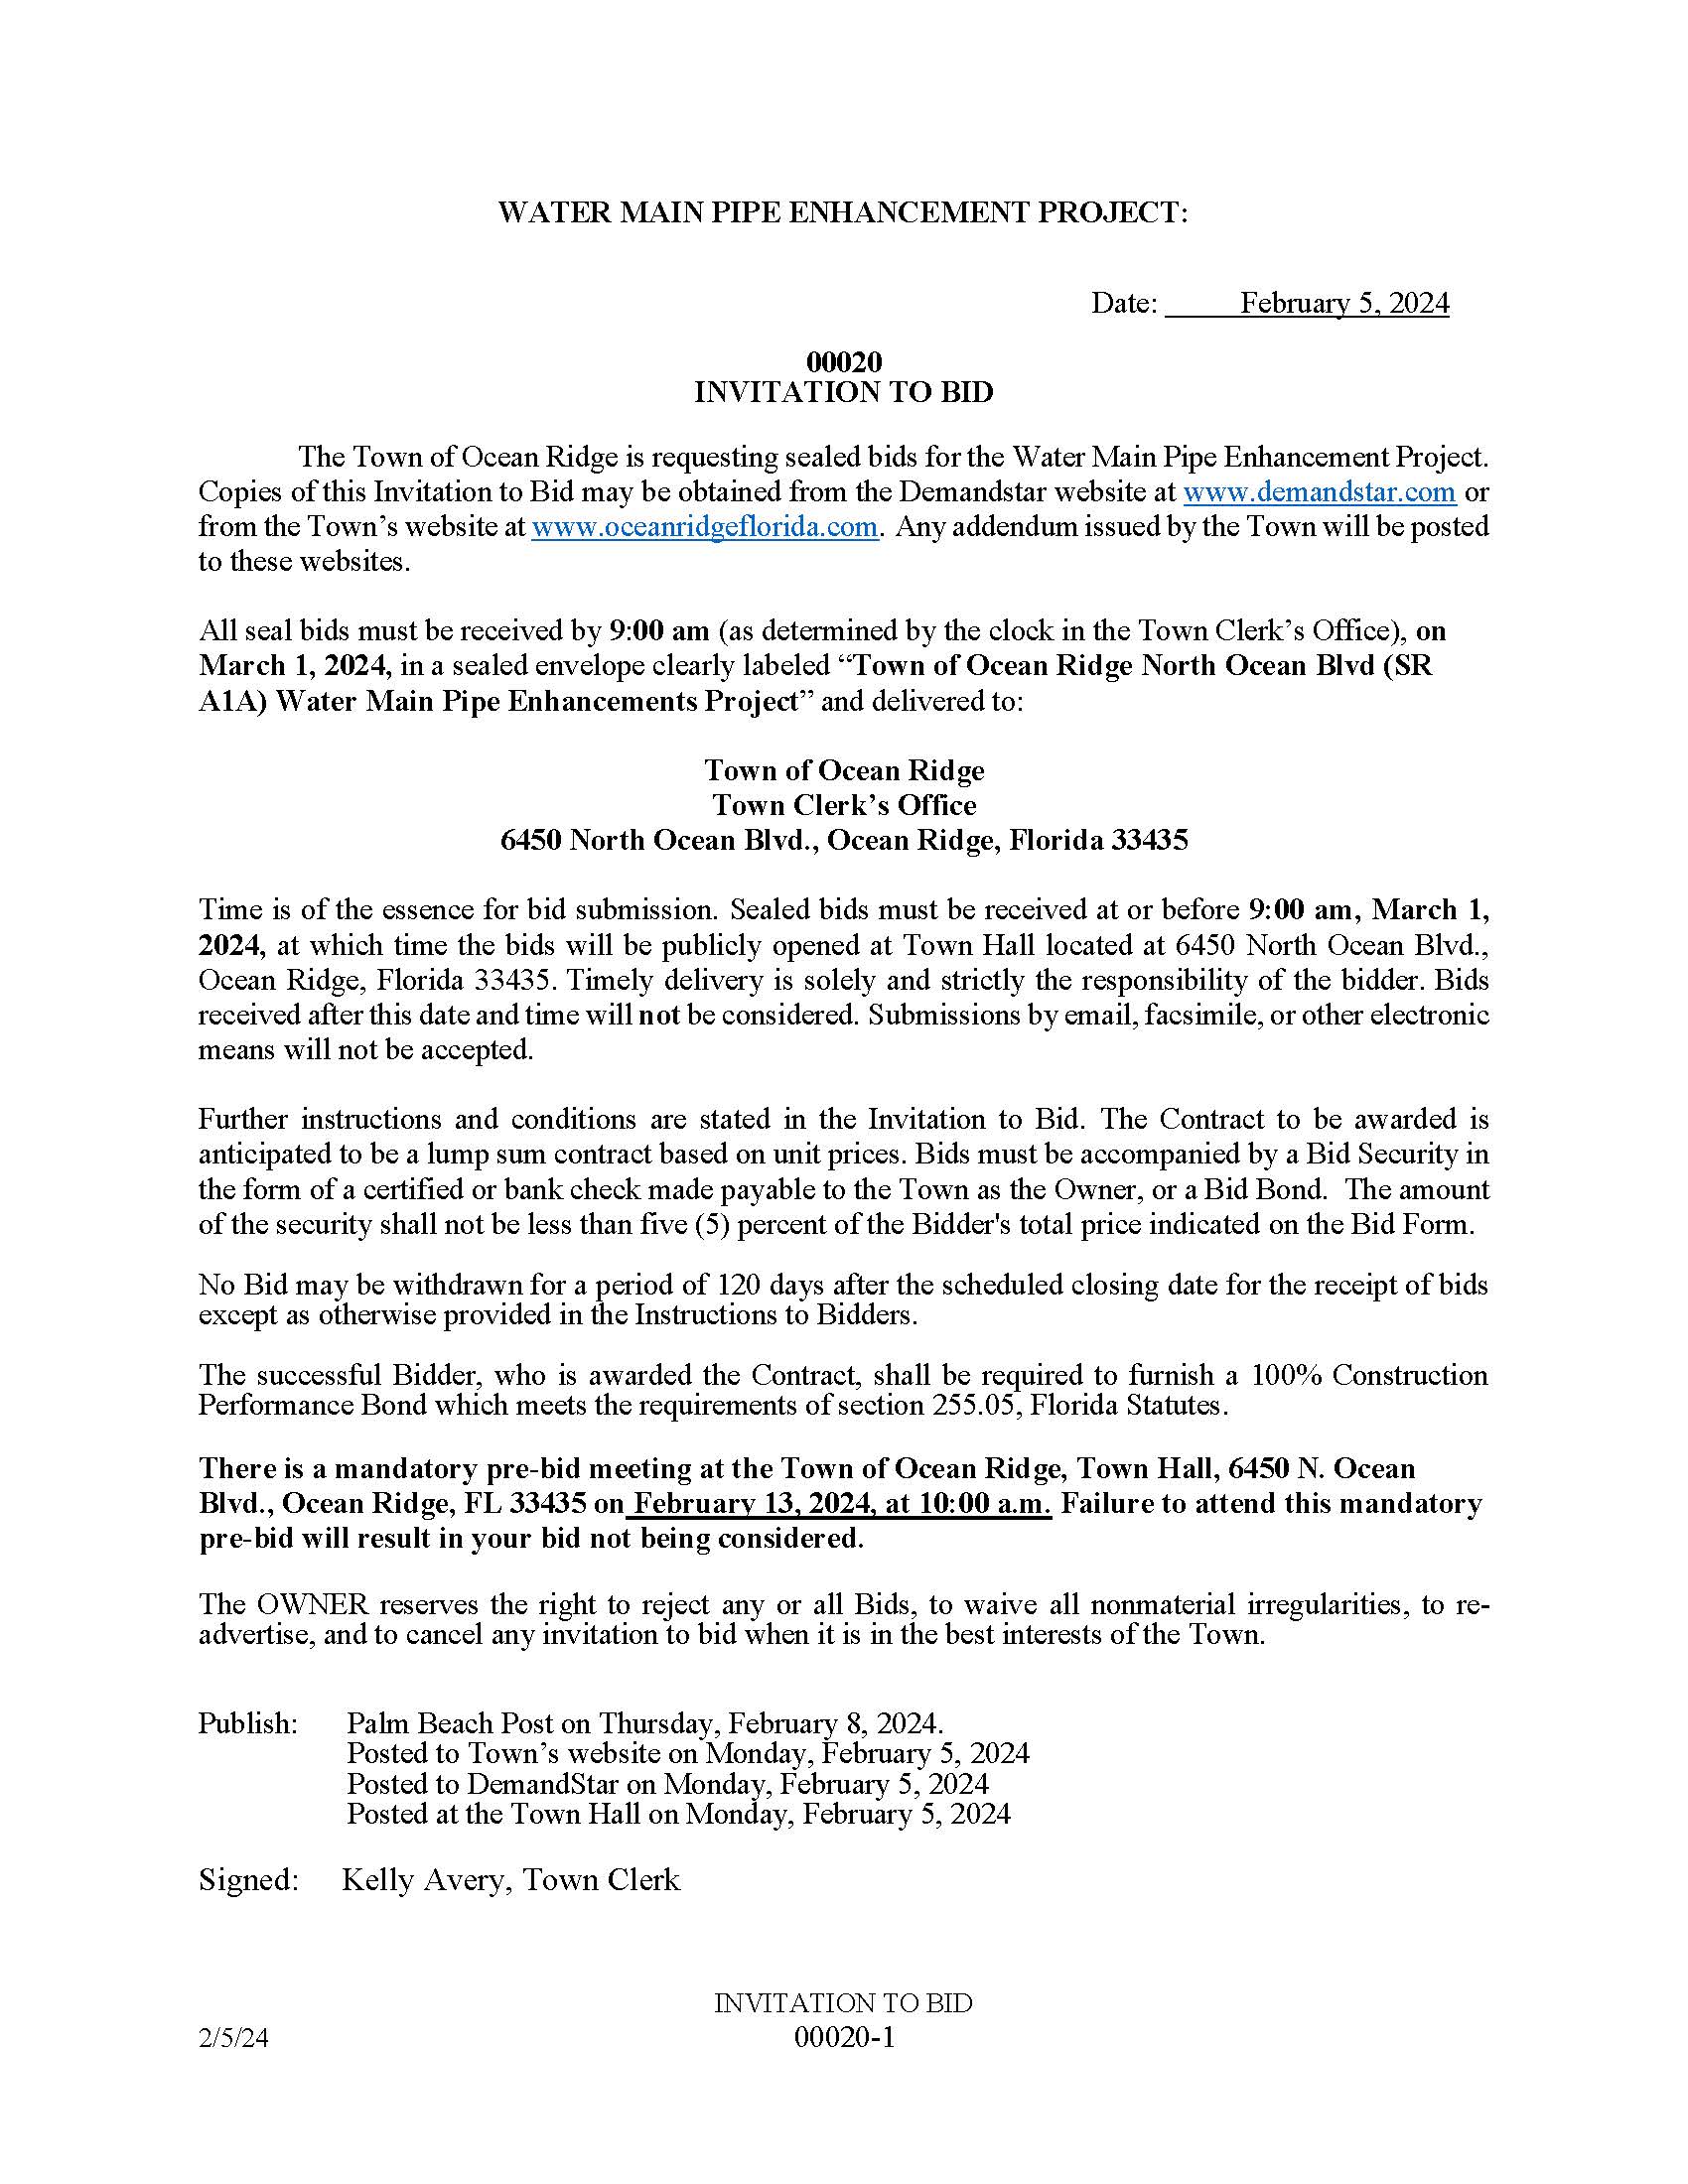 Advertisement for bid North Ocean Blvd (A1A) Water Main Pipe Enhancements -2nd round